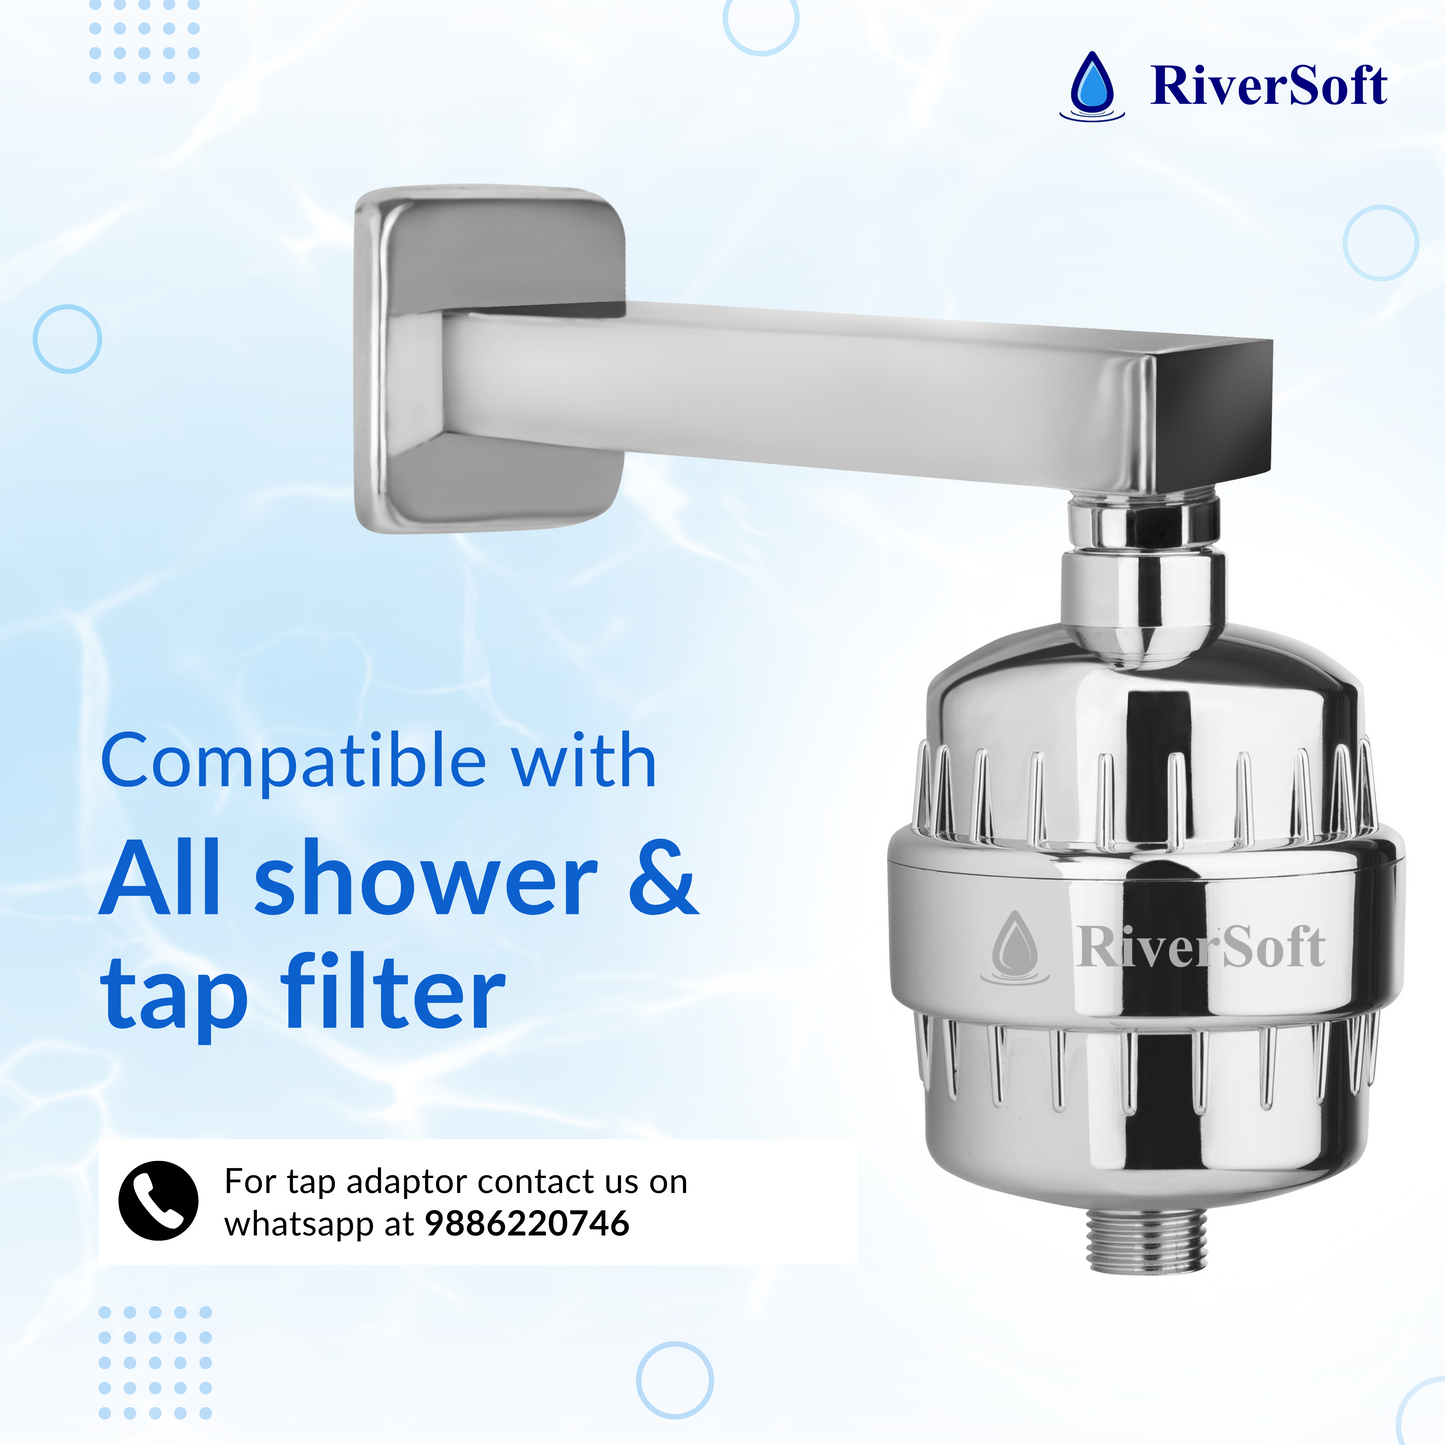 Bliss 15 shower and tap filter for hard water with 15 stage | For higher hardness | New model